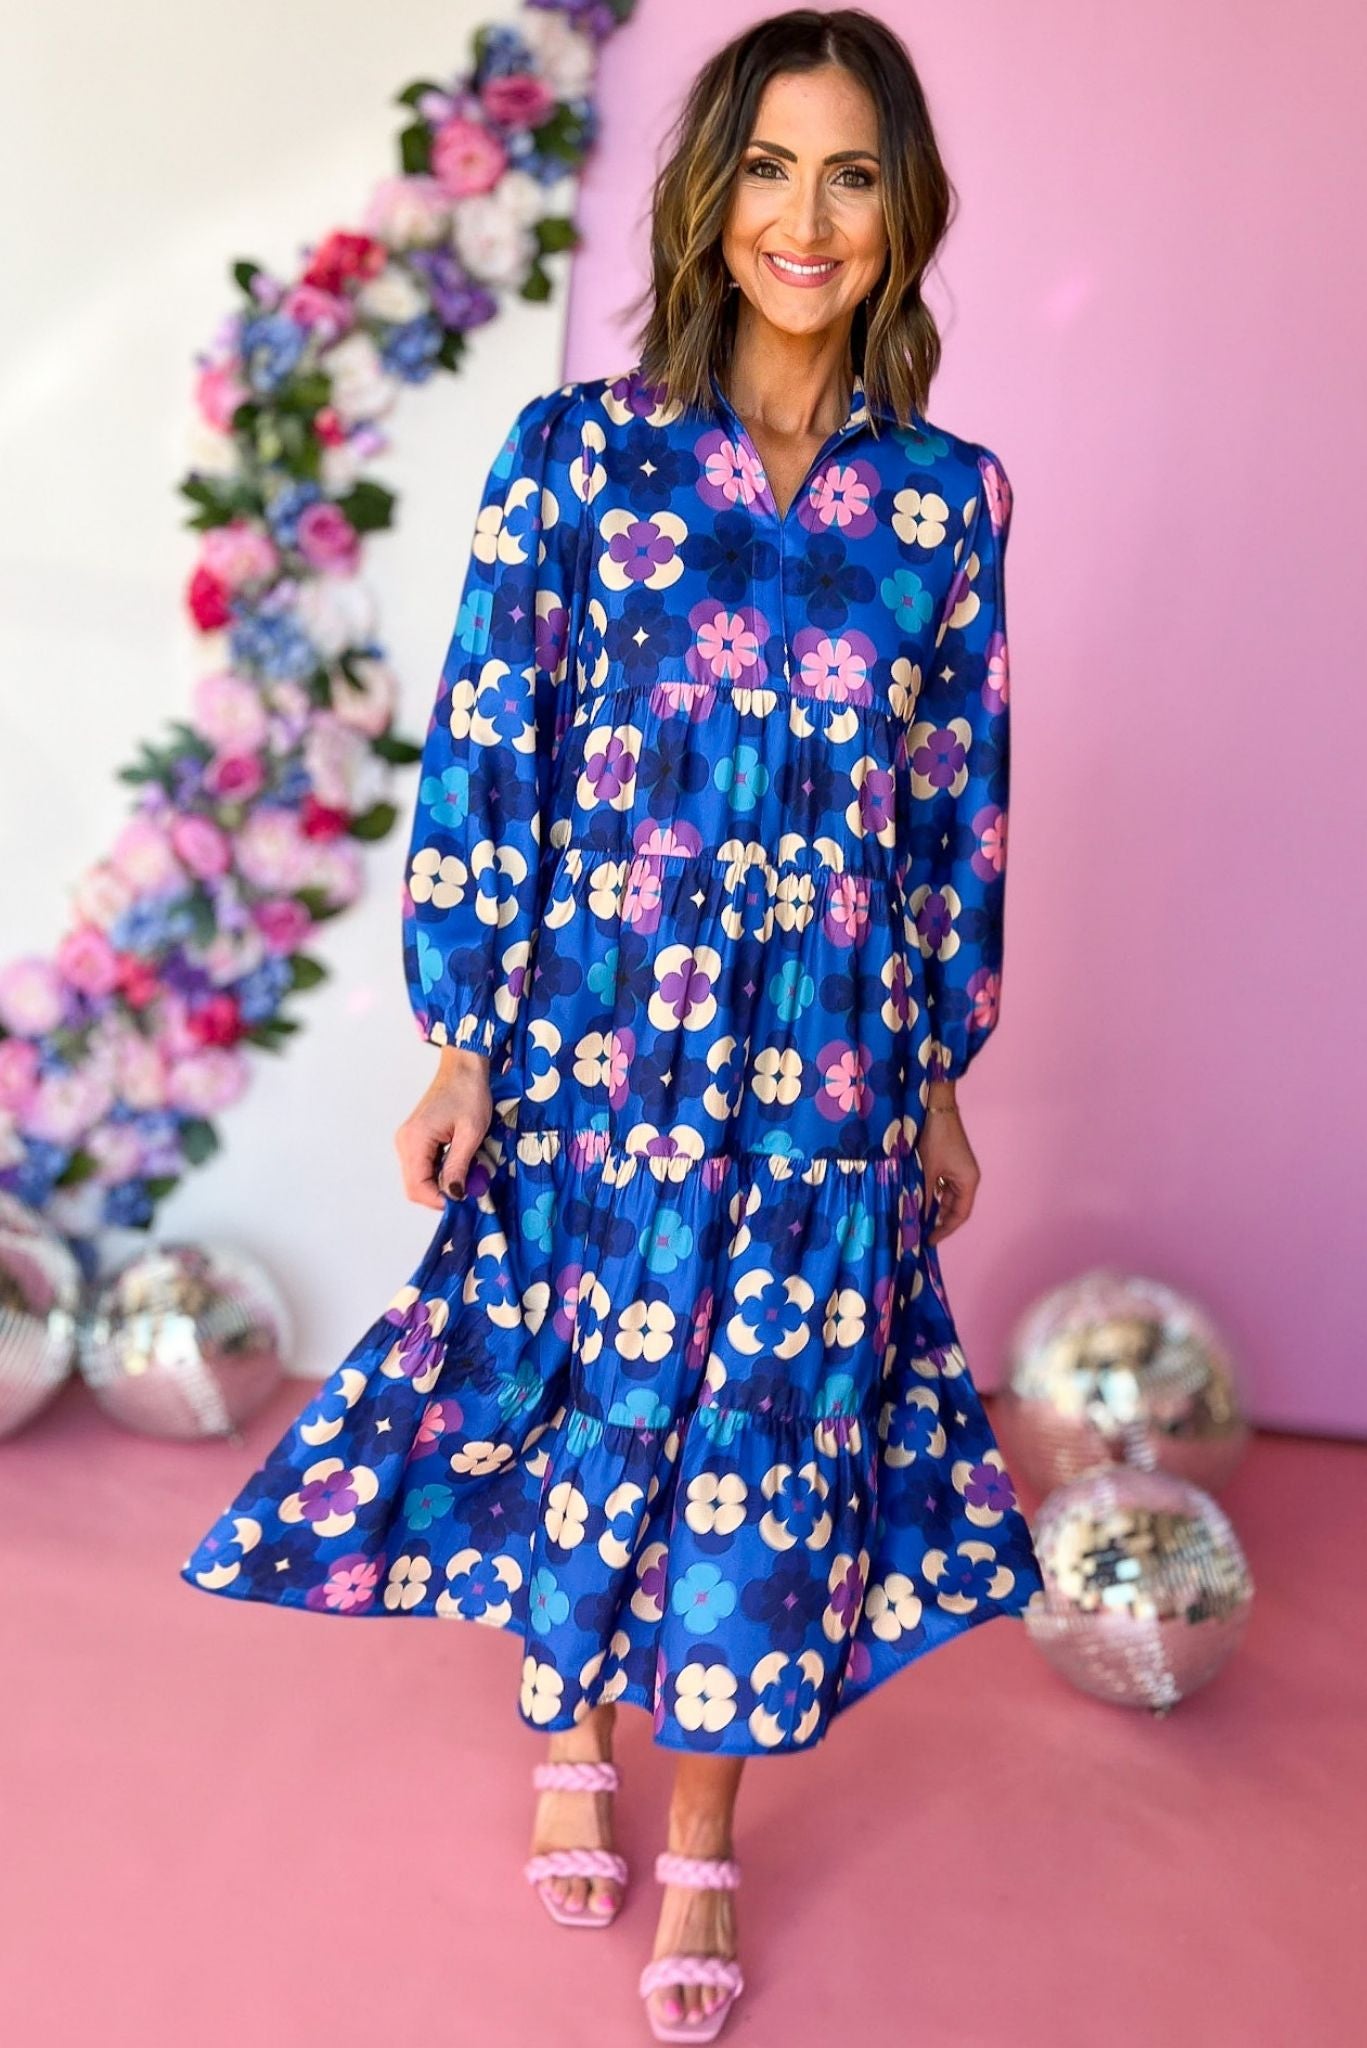 SSYS Vintage Petals Print Long Sleeve Collared Maxi Dress, pops and prints, must have, floral, midi dress, mom style, shop style your senses by mallory fitzsimmons